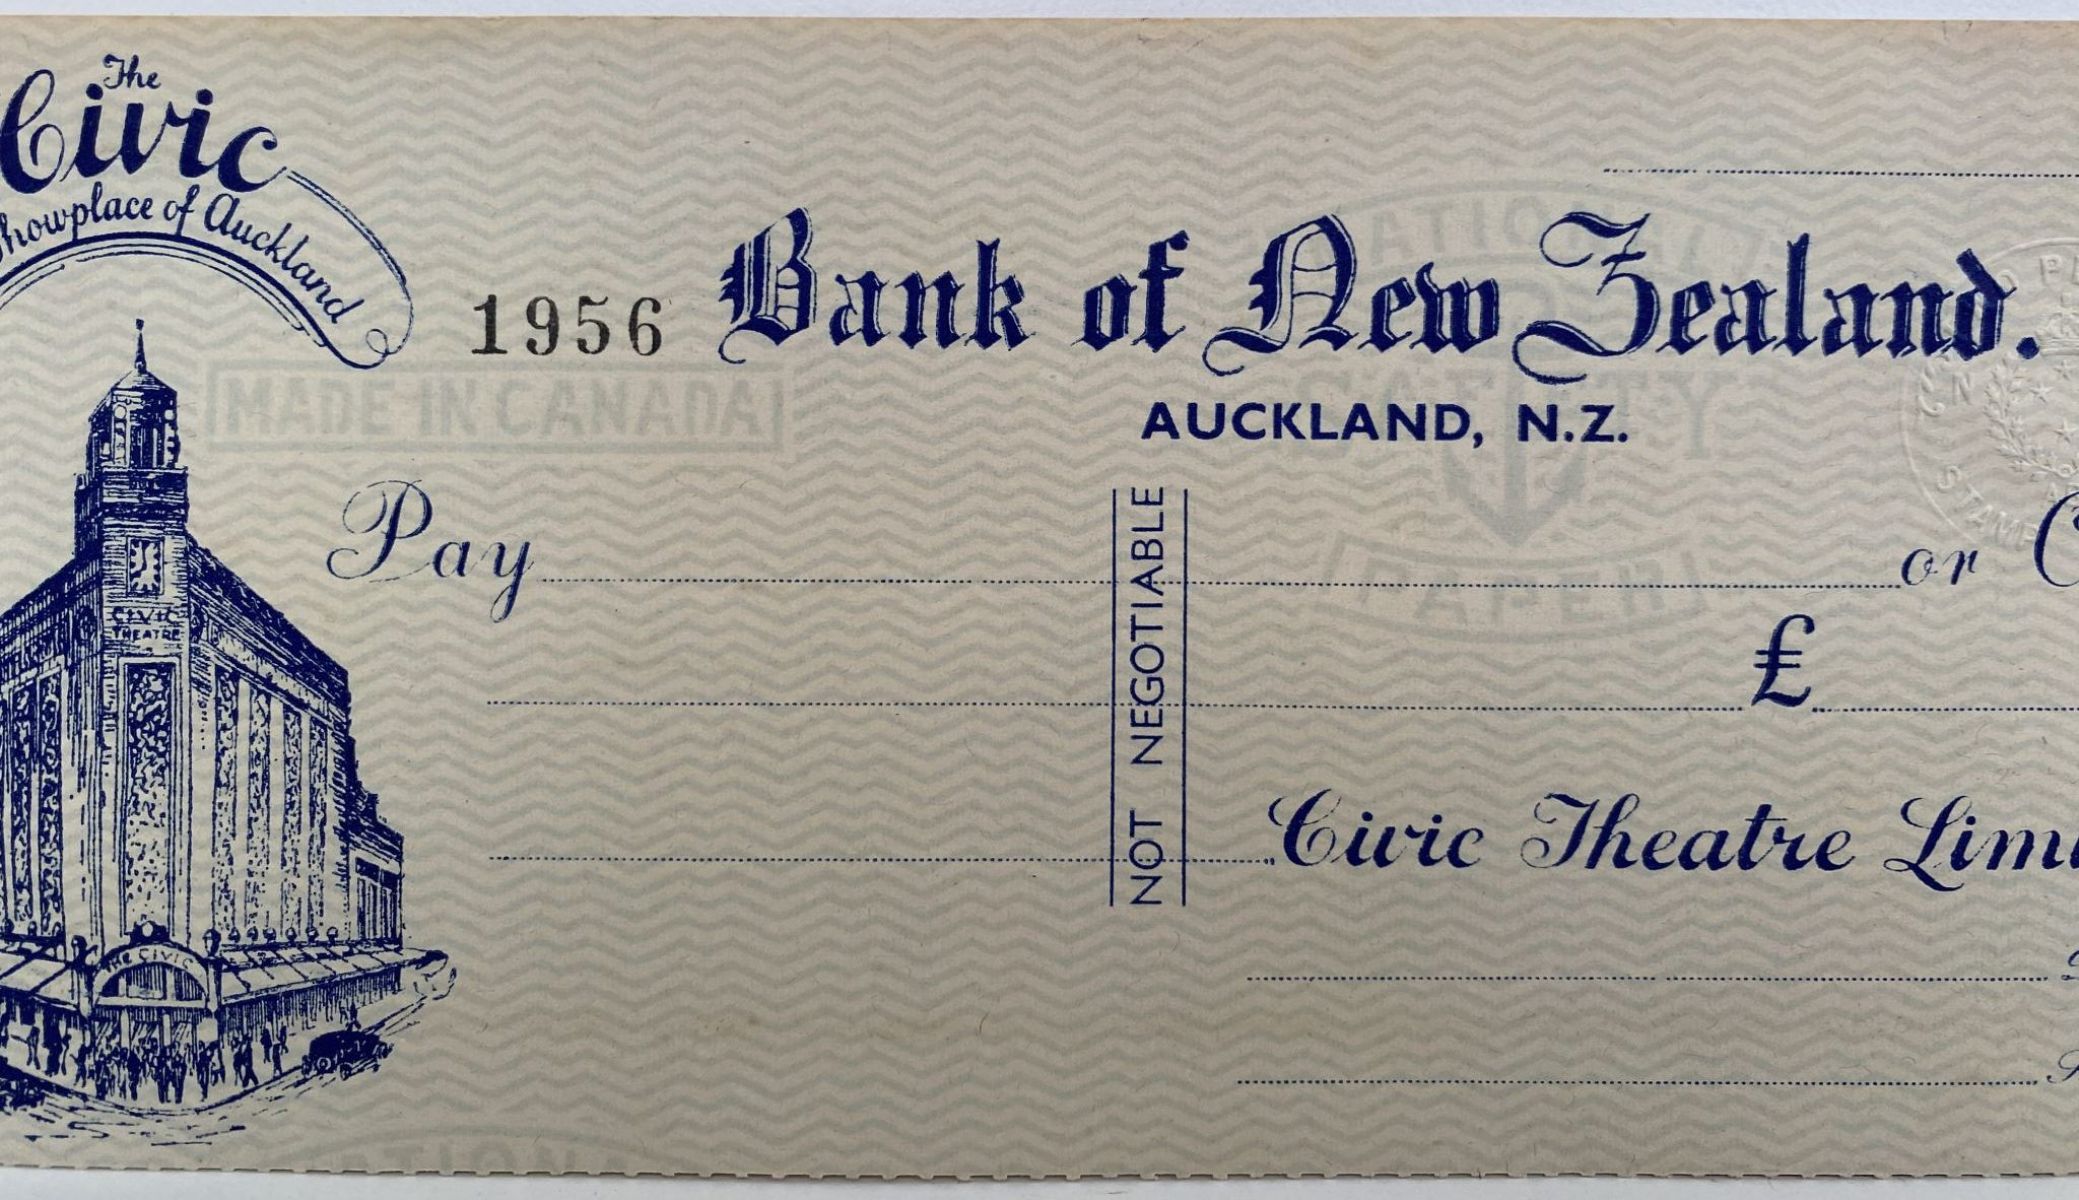 OLD BANKING MEMORABILIA: Blank bank cheque issued by BNZ Bank, Auckland